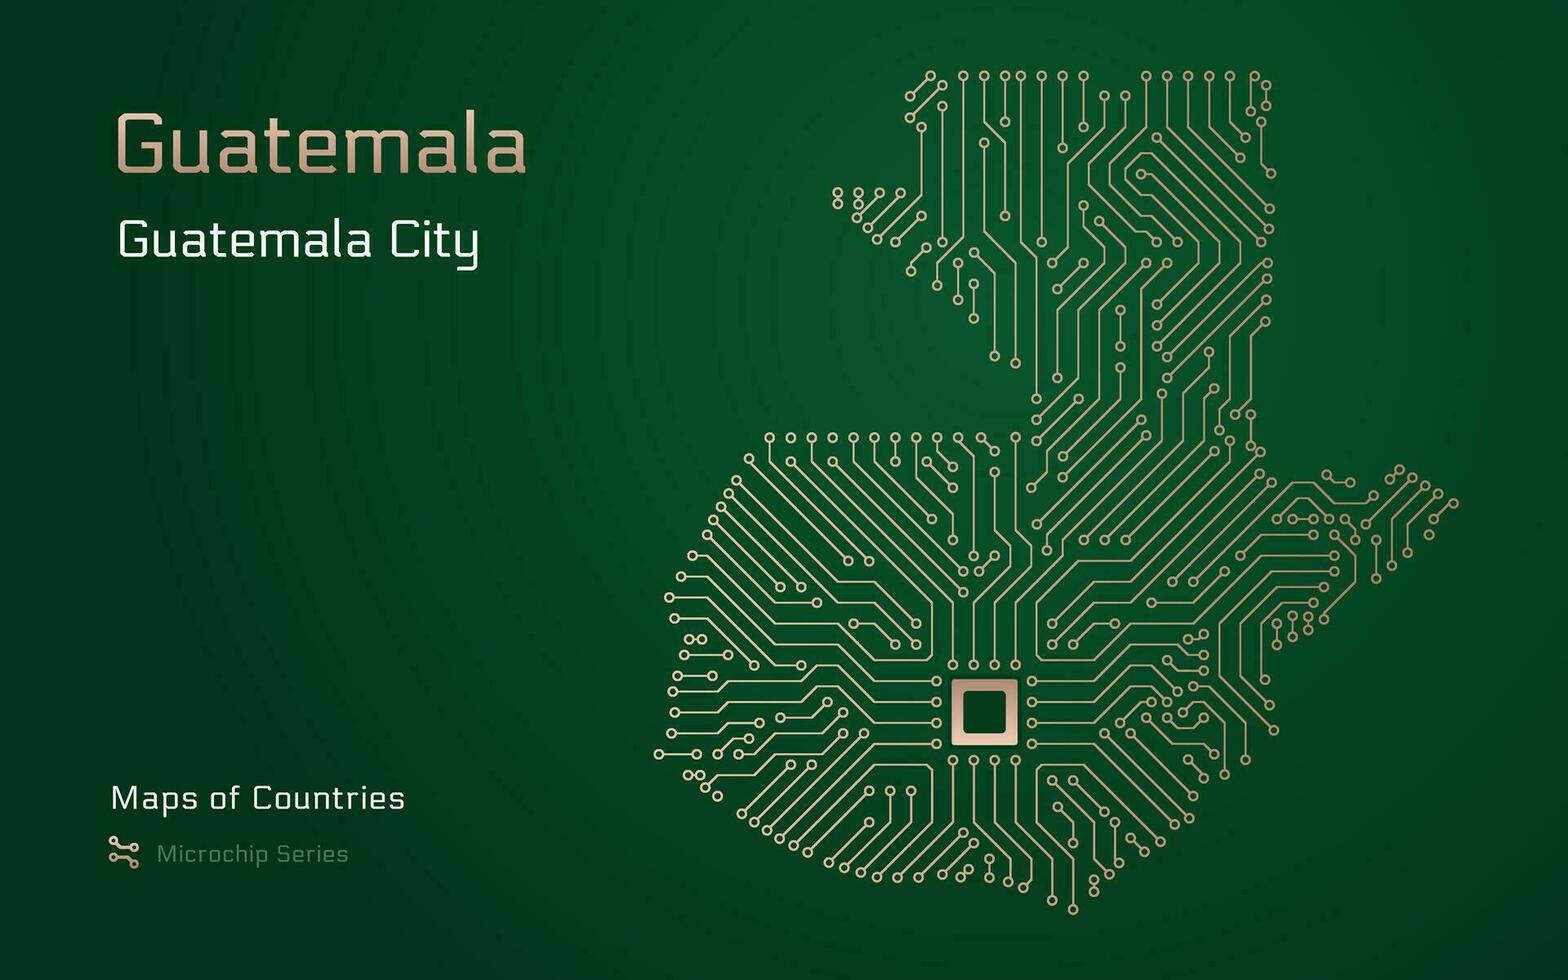 Guatemala Map with a capital of Guatemala City Shown in a Microchip Pattern. E-government. TSMC. World Countries vector maps. Microchip Series